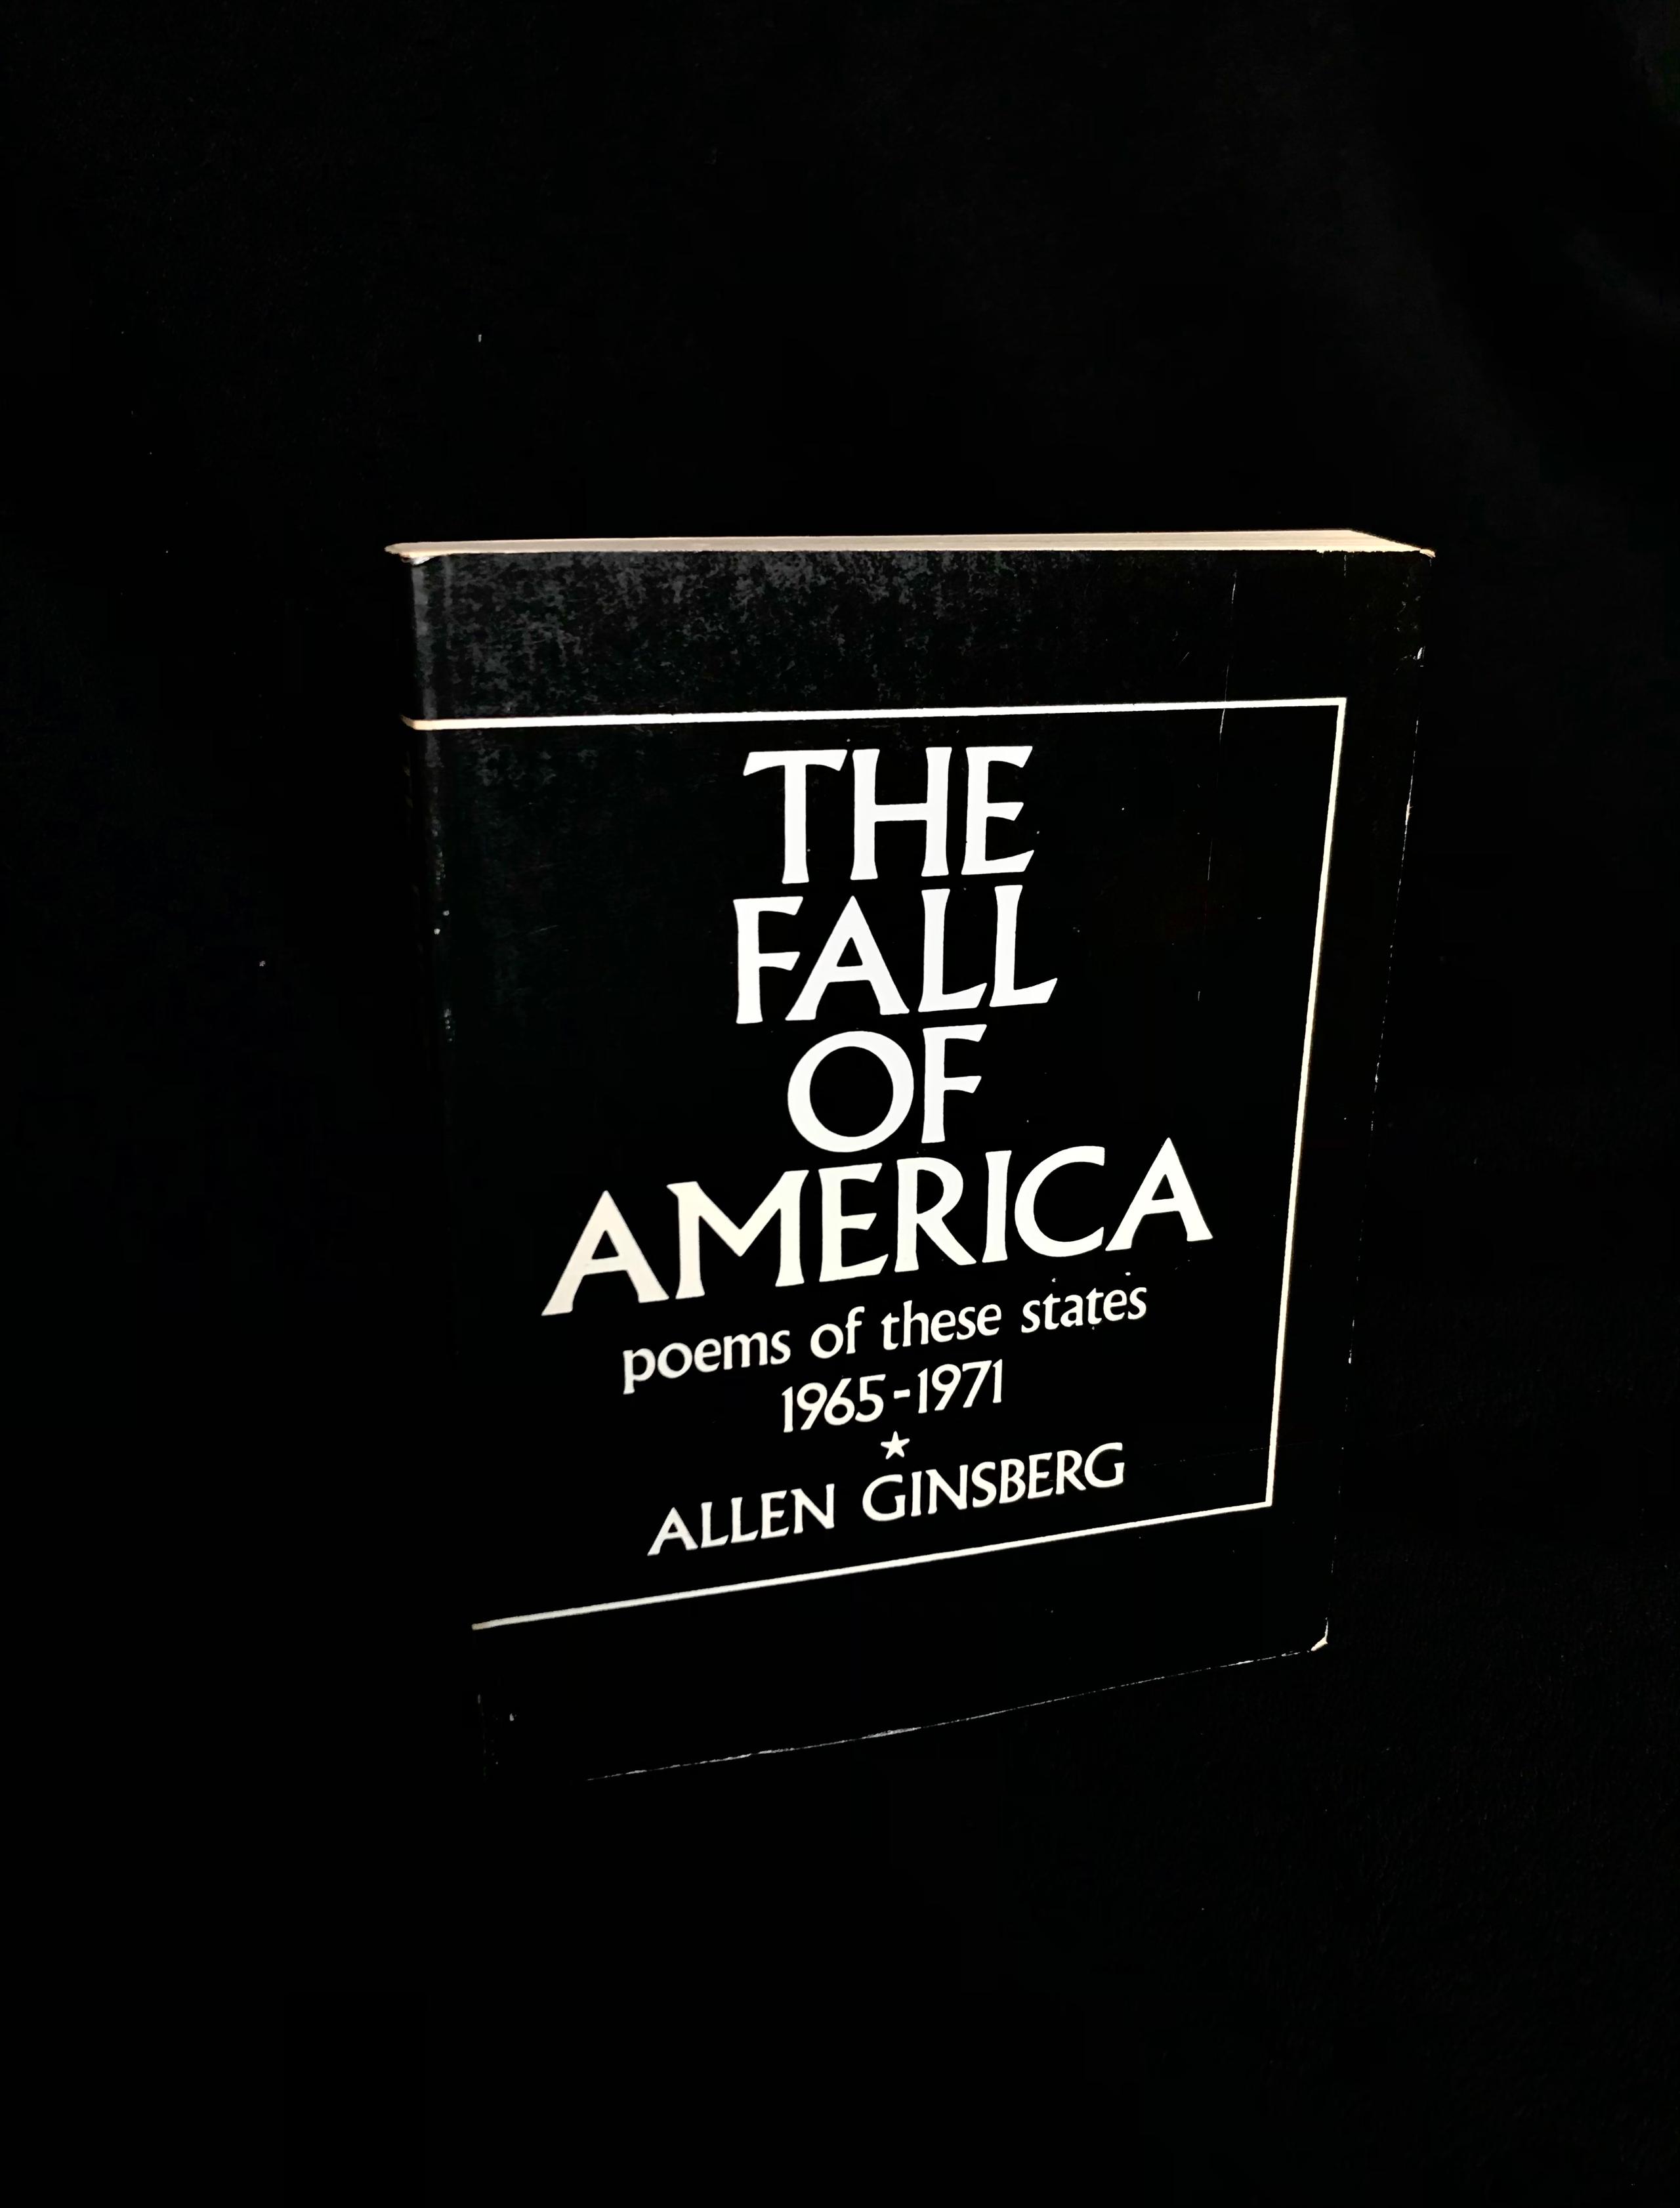 The Fall Of America: Poems Of These States 1965-1971 by Allen Ginsburg